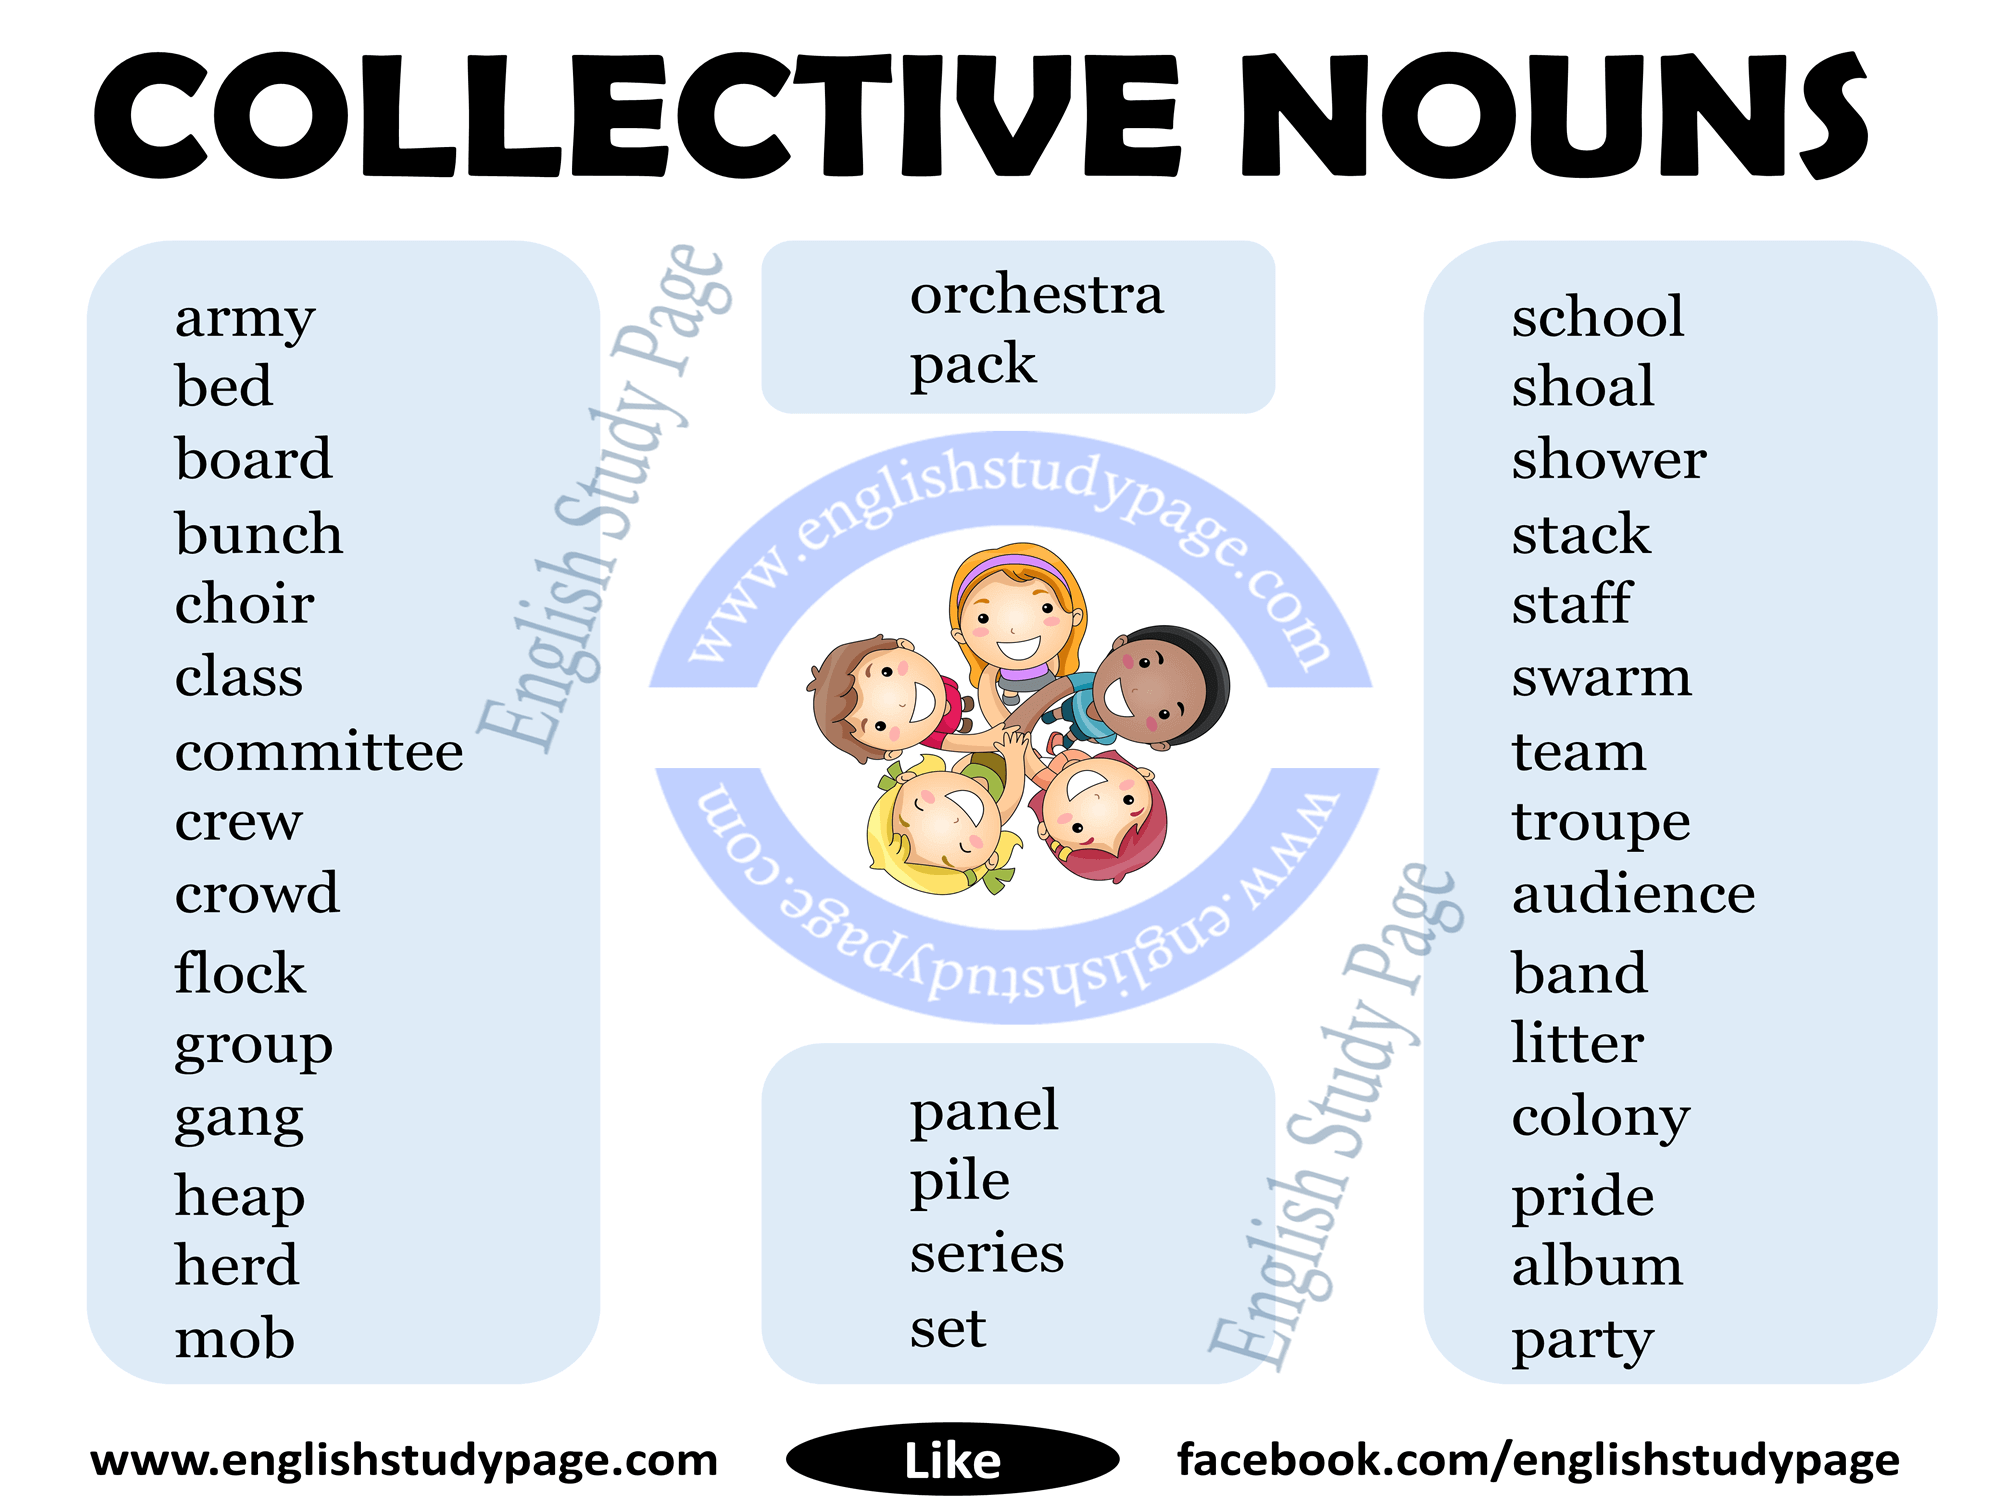 What are collective nouns and how are they used?